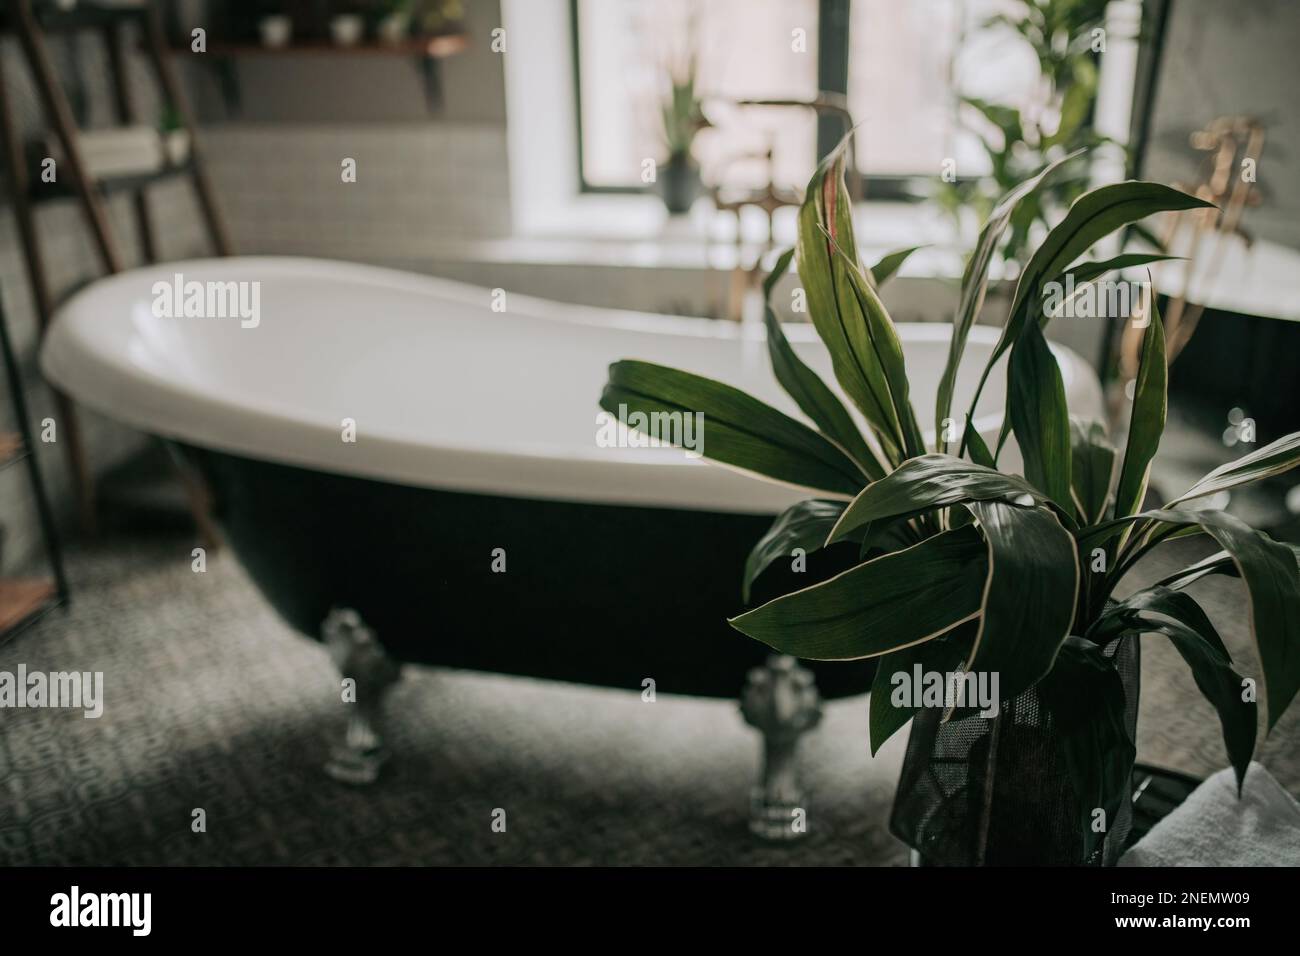 Native hues organic shapes look of bathroom with big window oval bathtub in neutrals earth tones. Green palm plants candles bubblebath leasure and rel Stock Photo